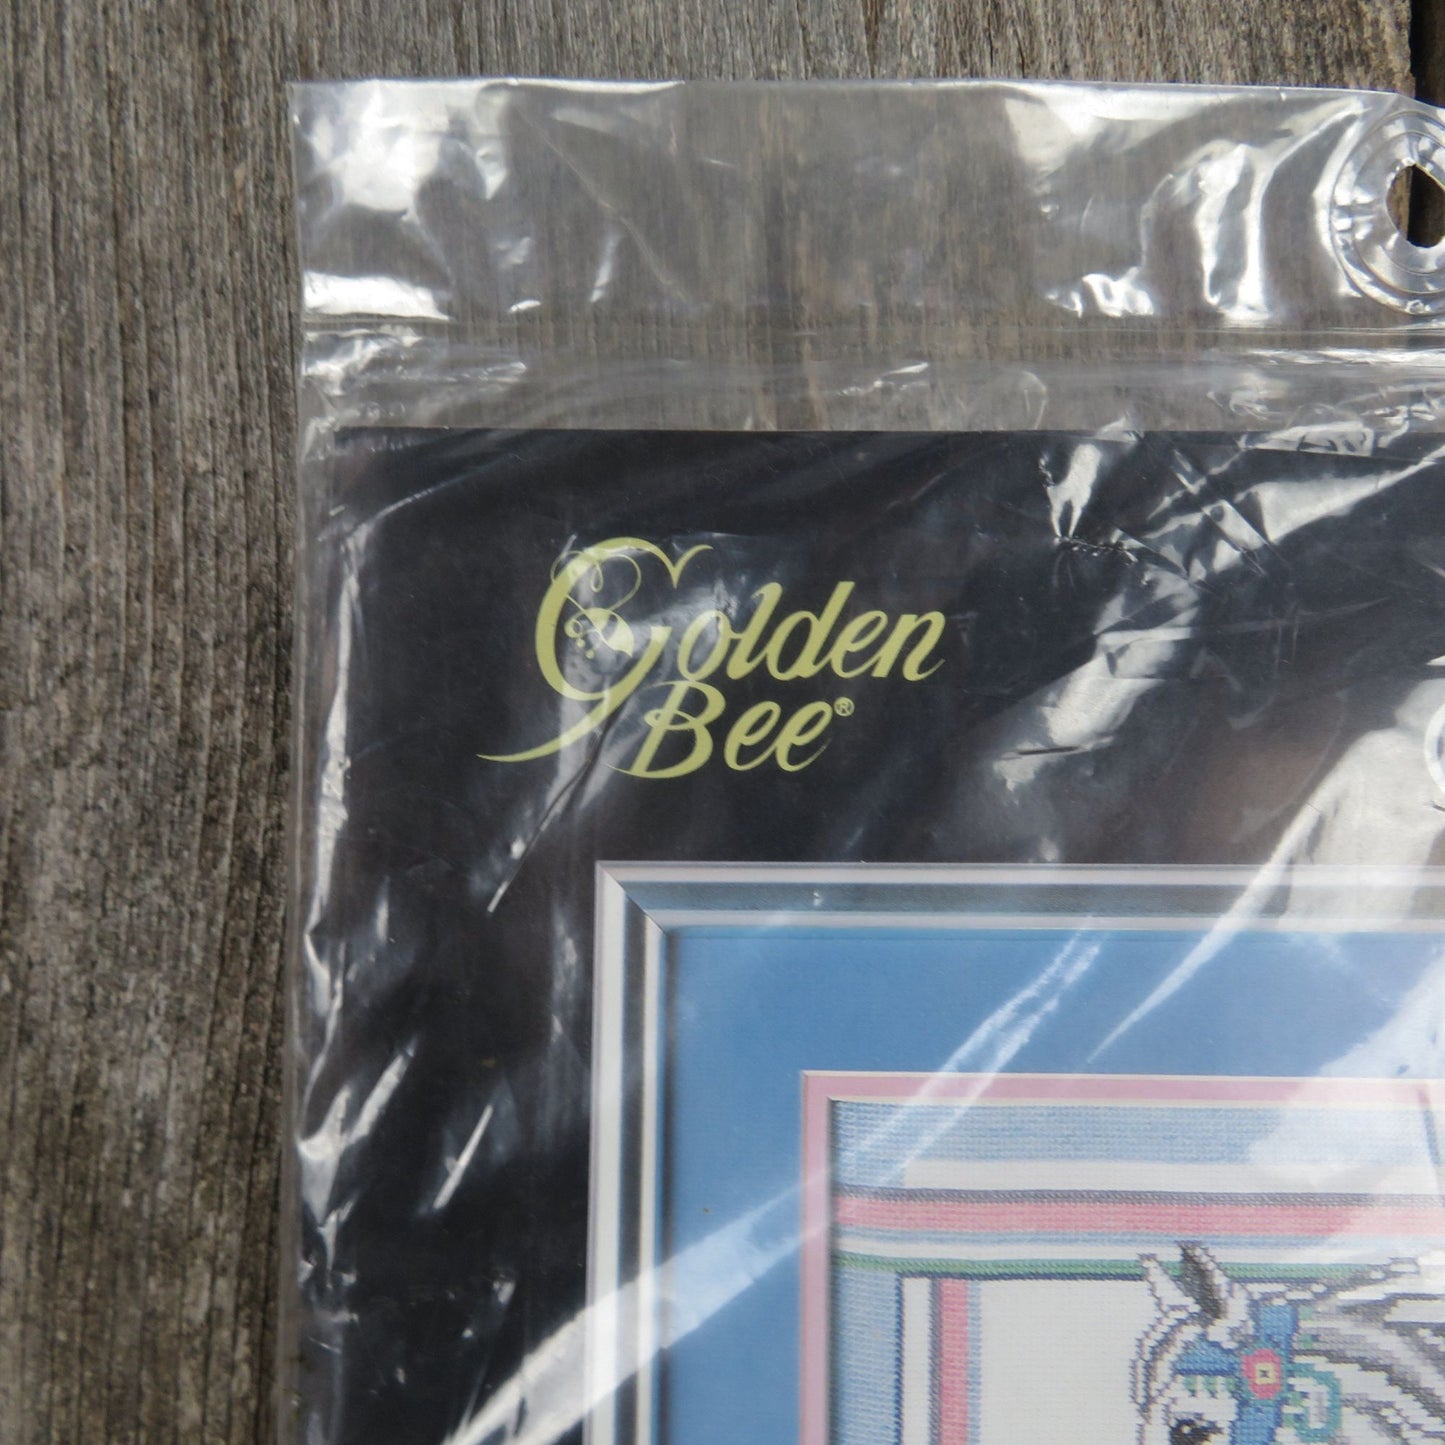 Carousel Horse Counted Cross Stitch Kit Golden Bee 60277 Merry Go Round